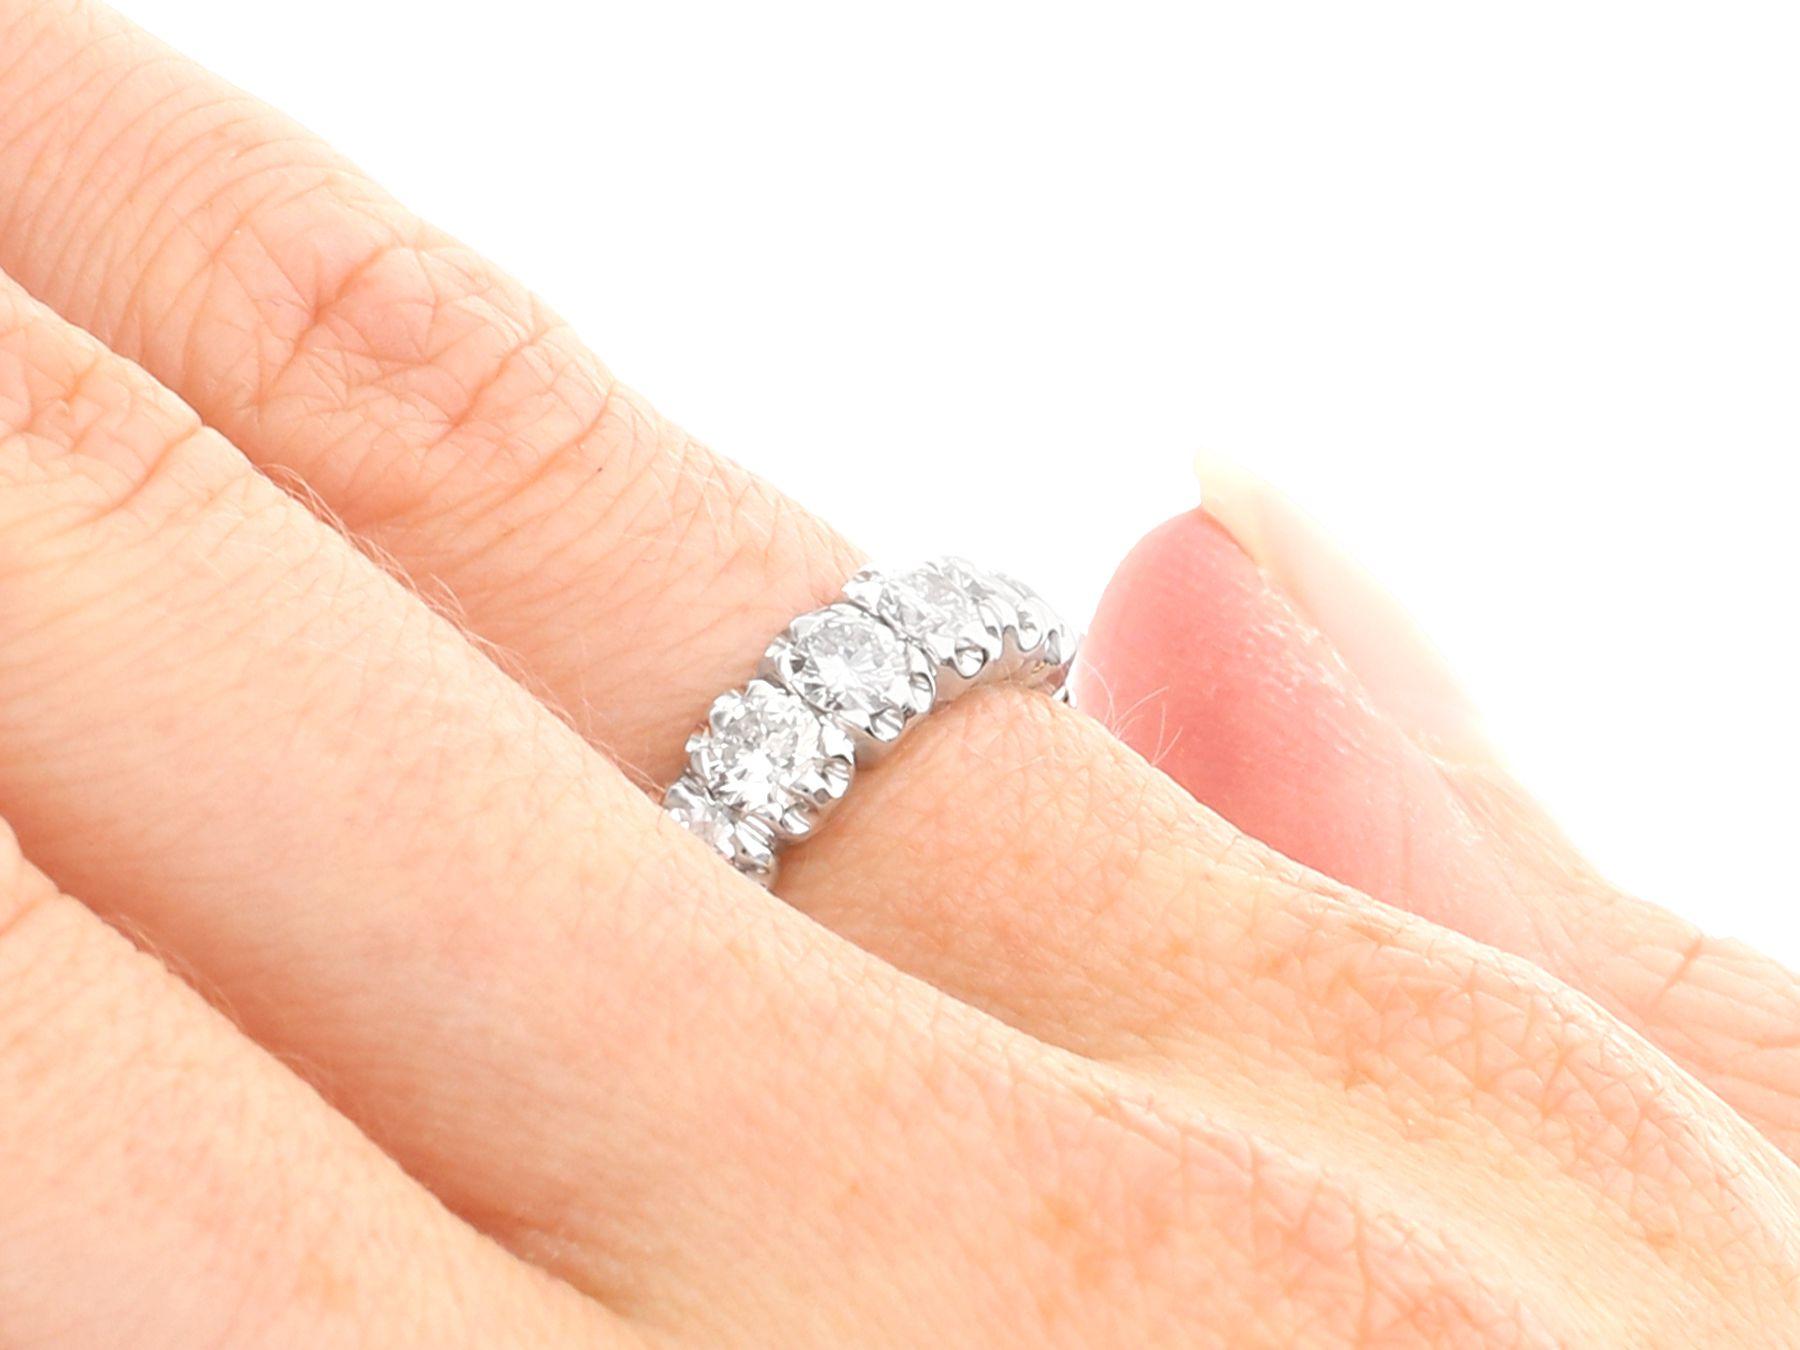 Vintage French 2.20 Carat Diamond and White Gold Full Eternity Ring For Sale 2